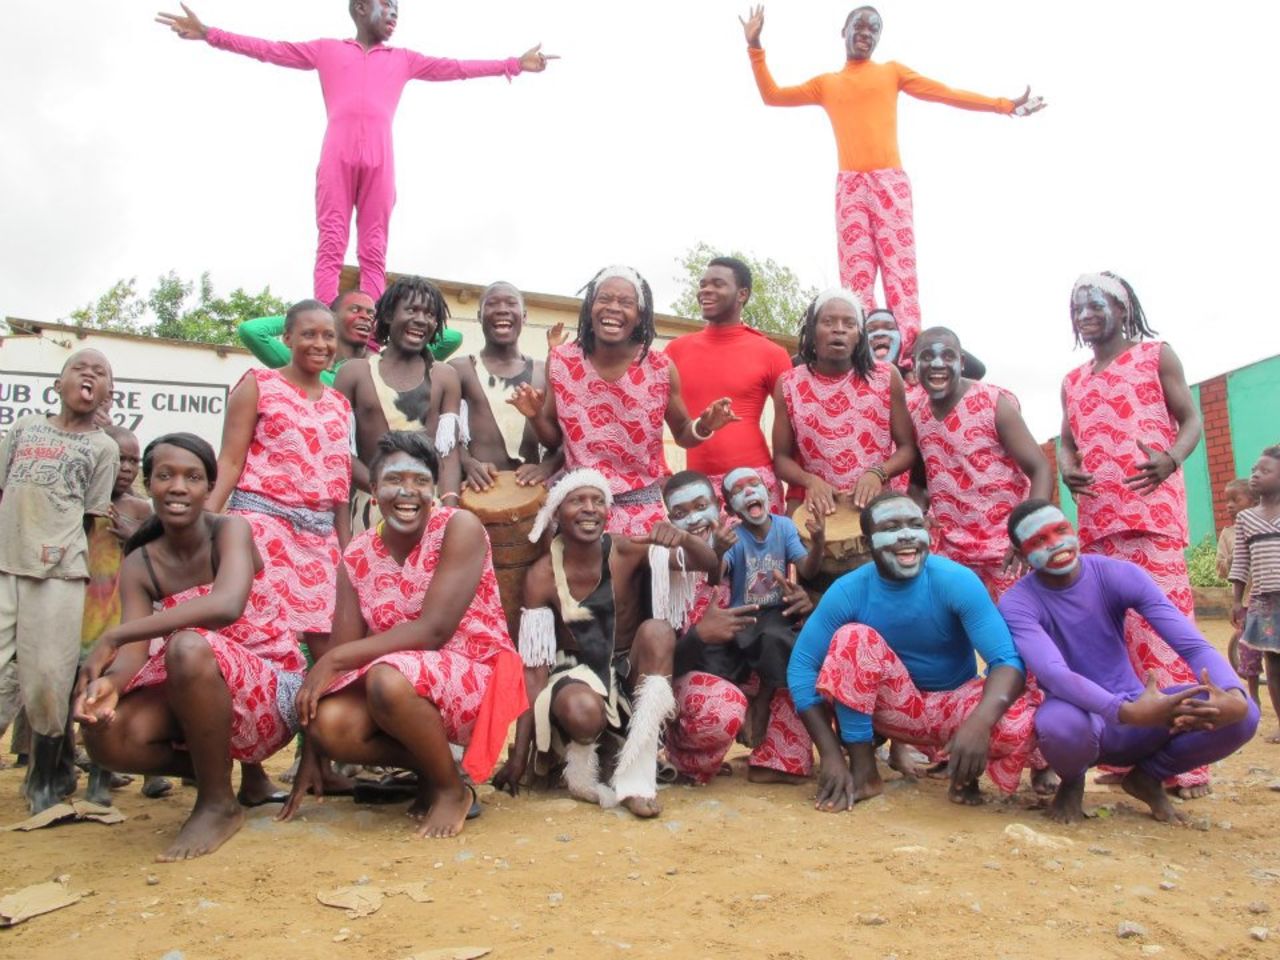 Barefeet Theatre is a group founded in 2006 that uses performing arts to engage with street children in Zambia.